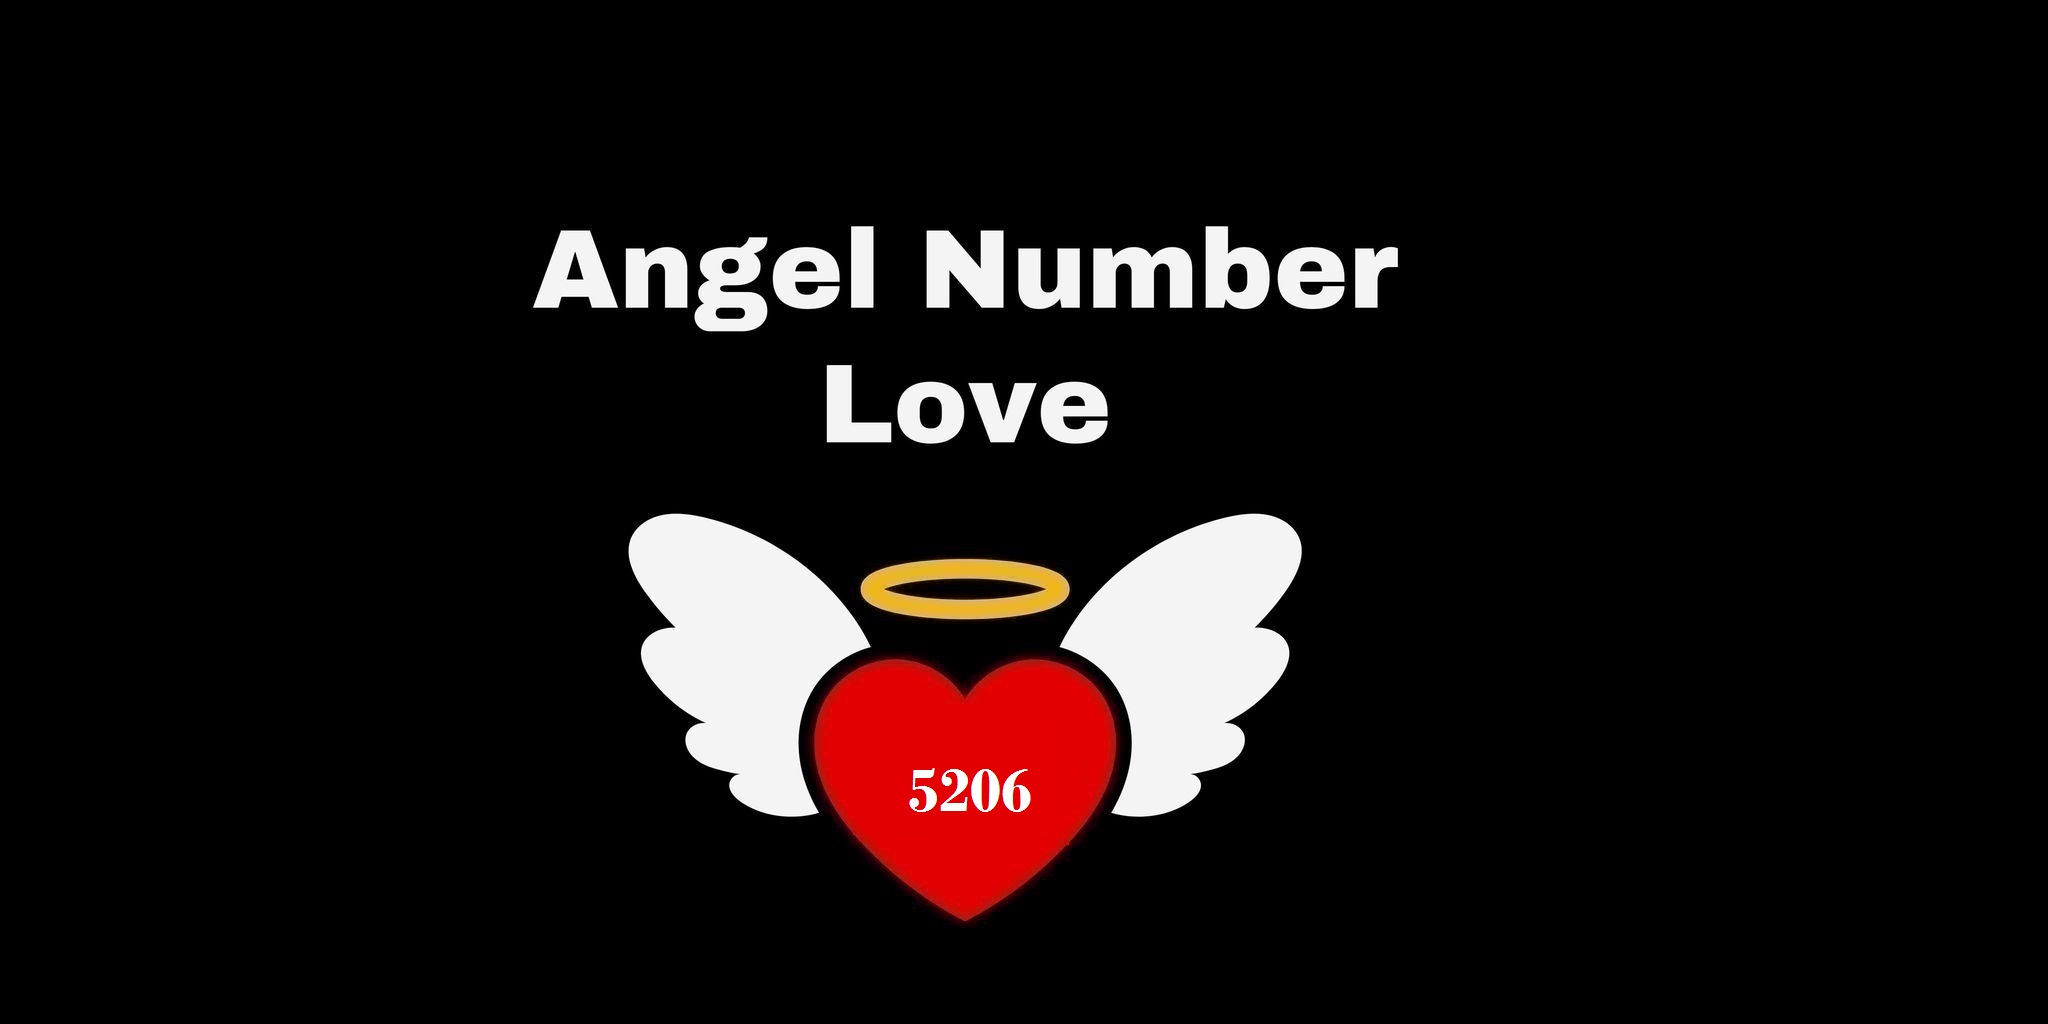 5206 Angel Number Meaning In Love